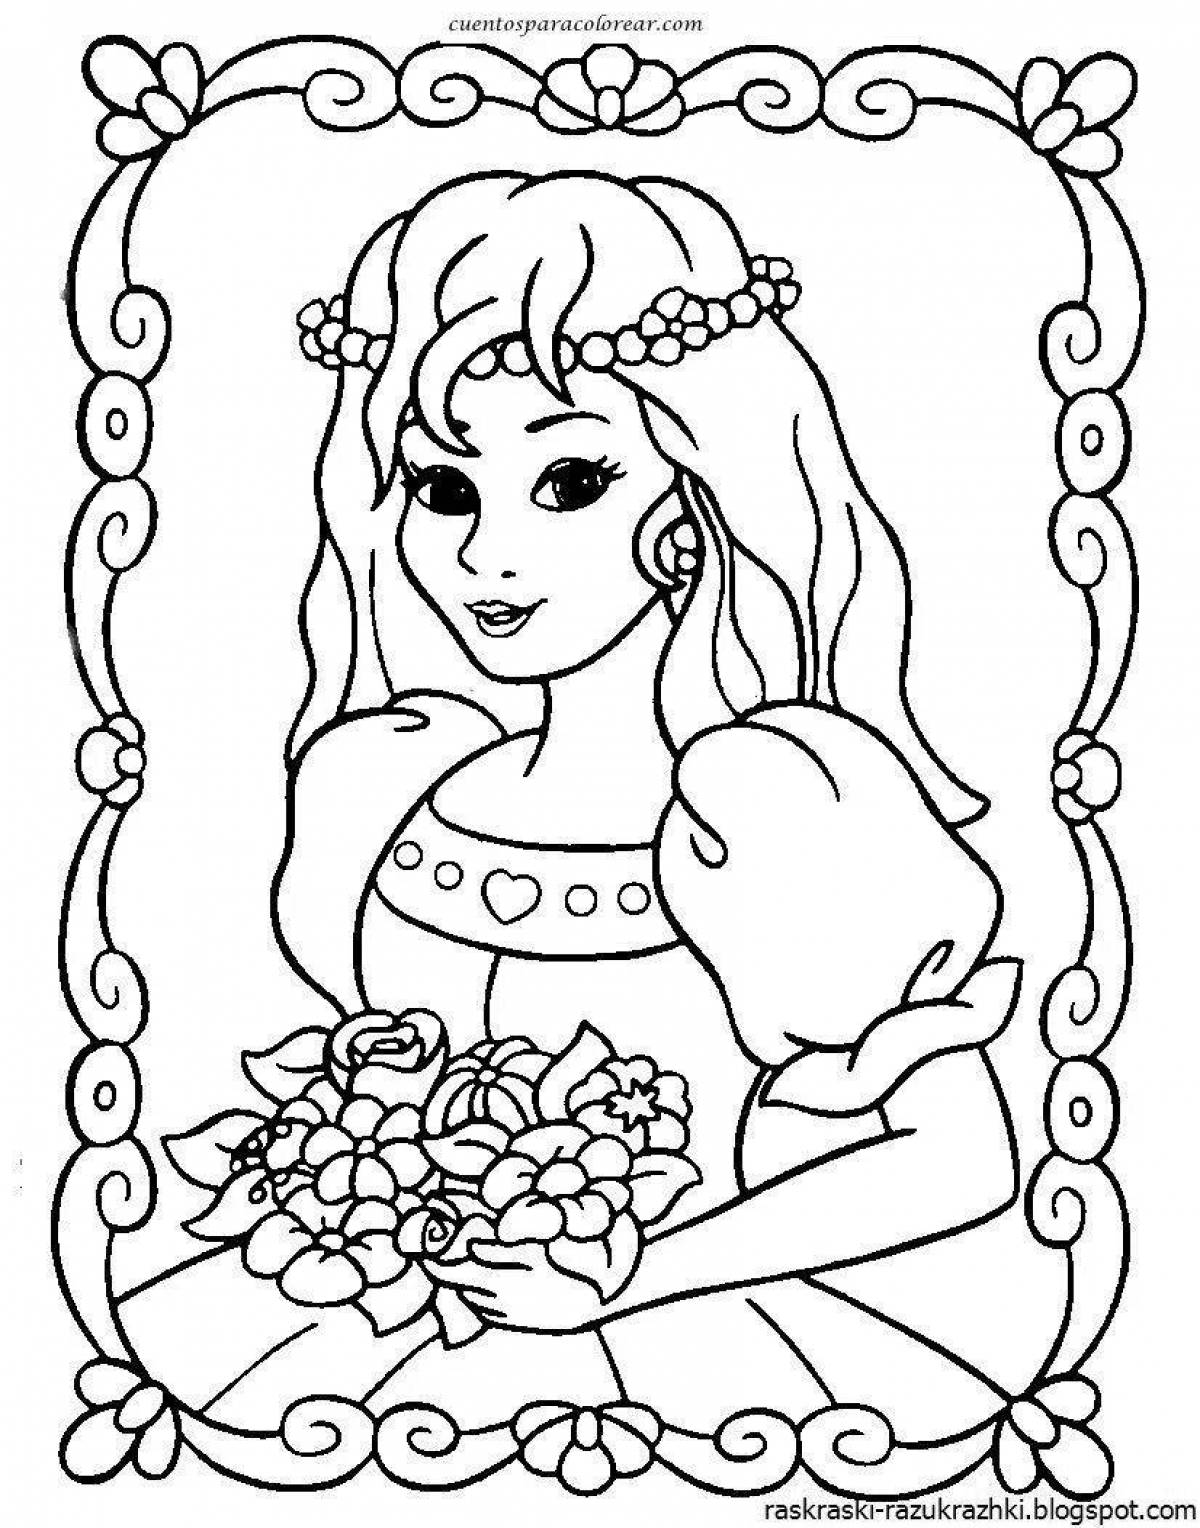 Glamorous coloring for girls 5 years old, princess